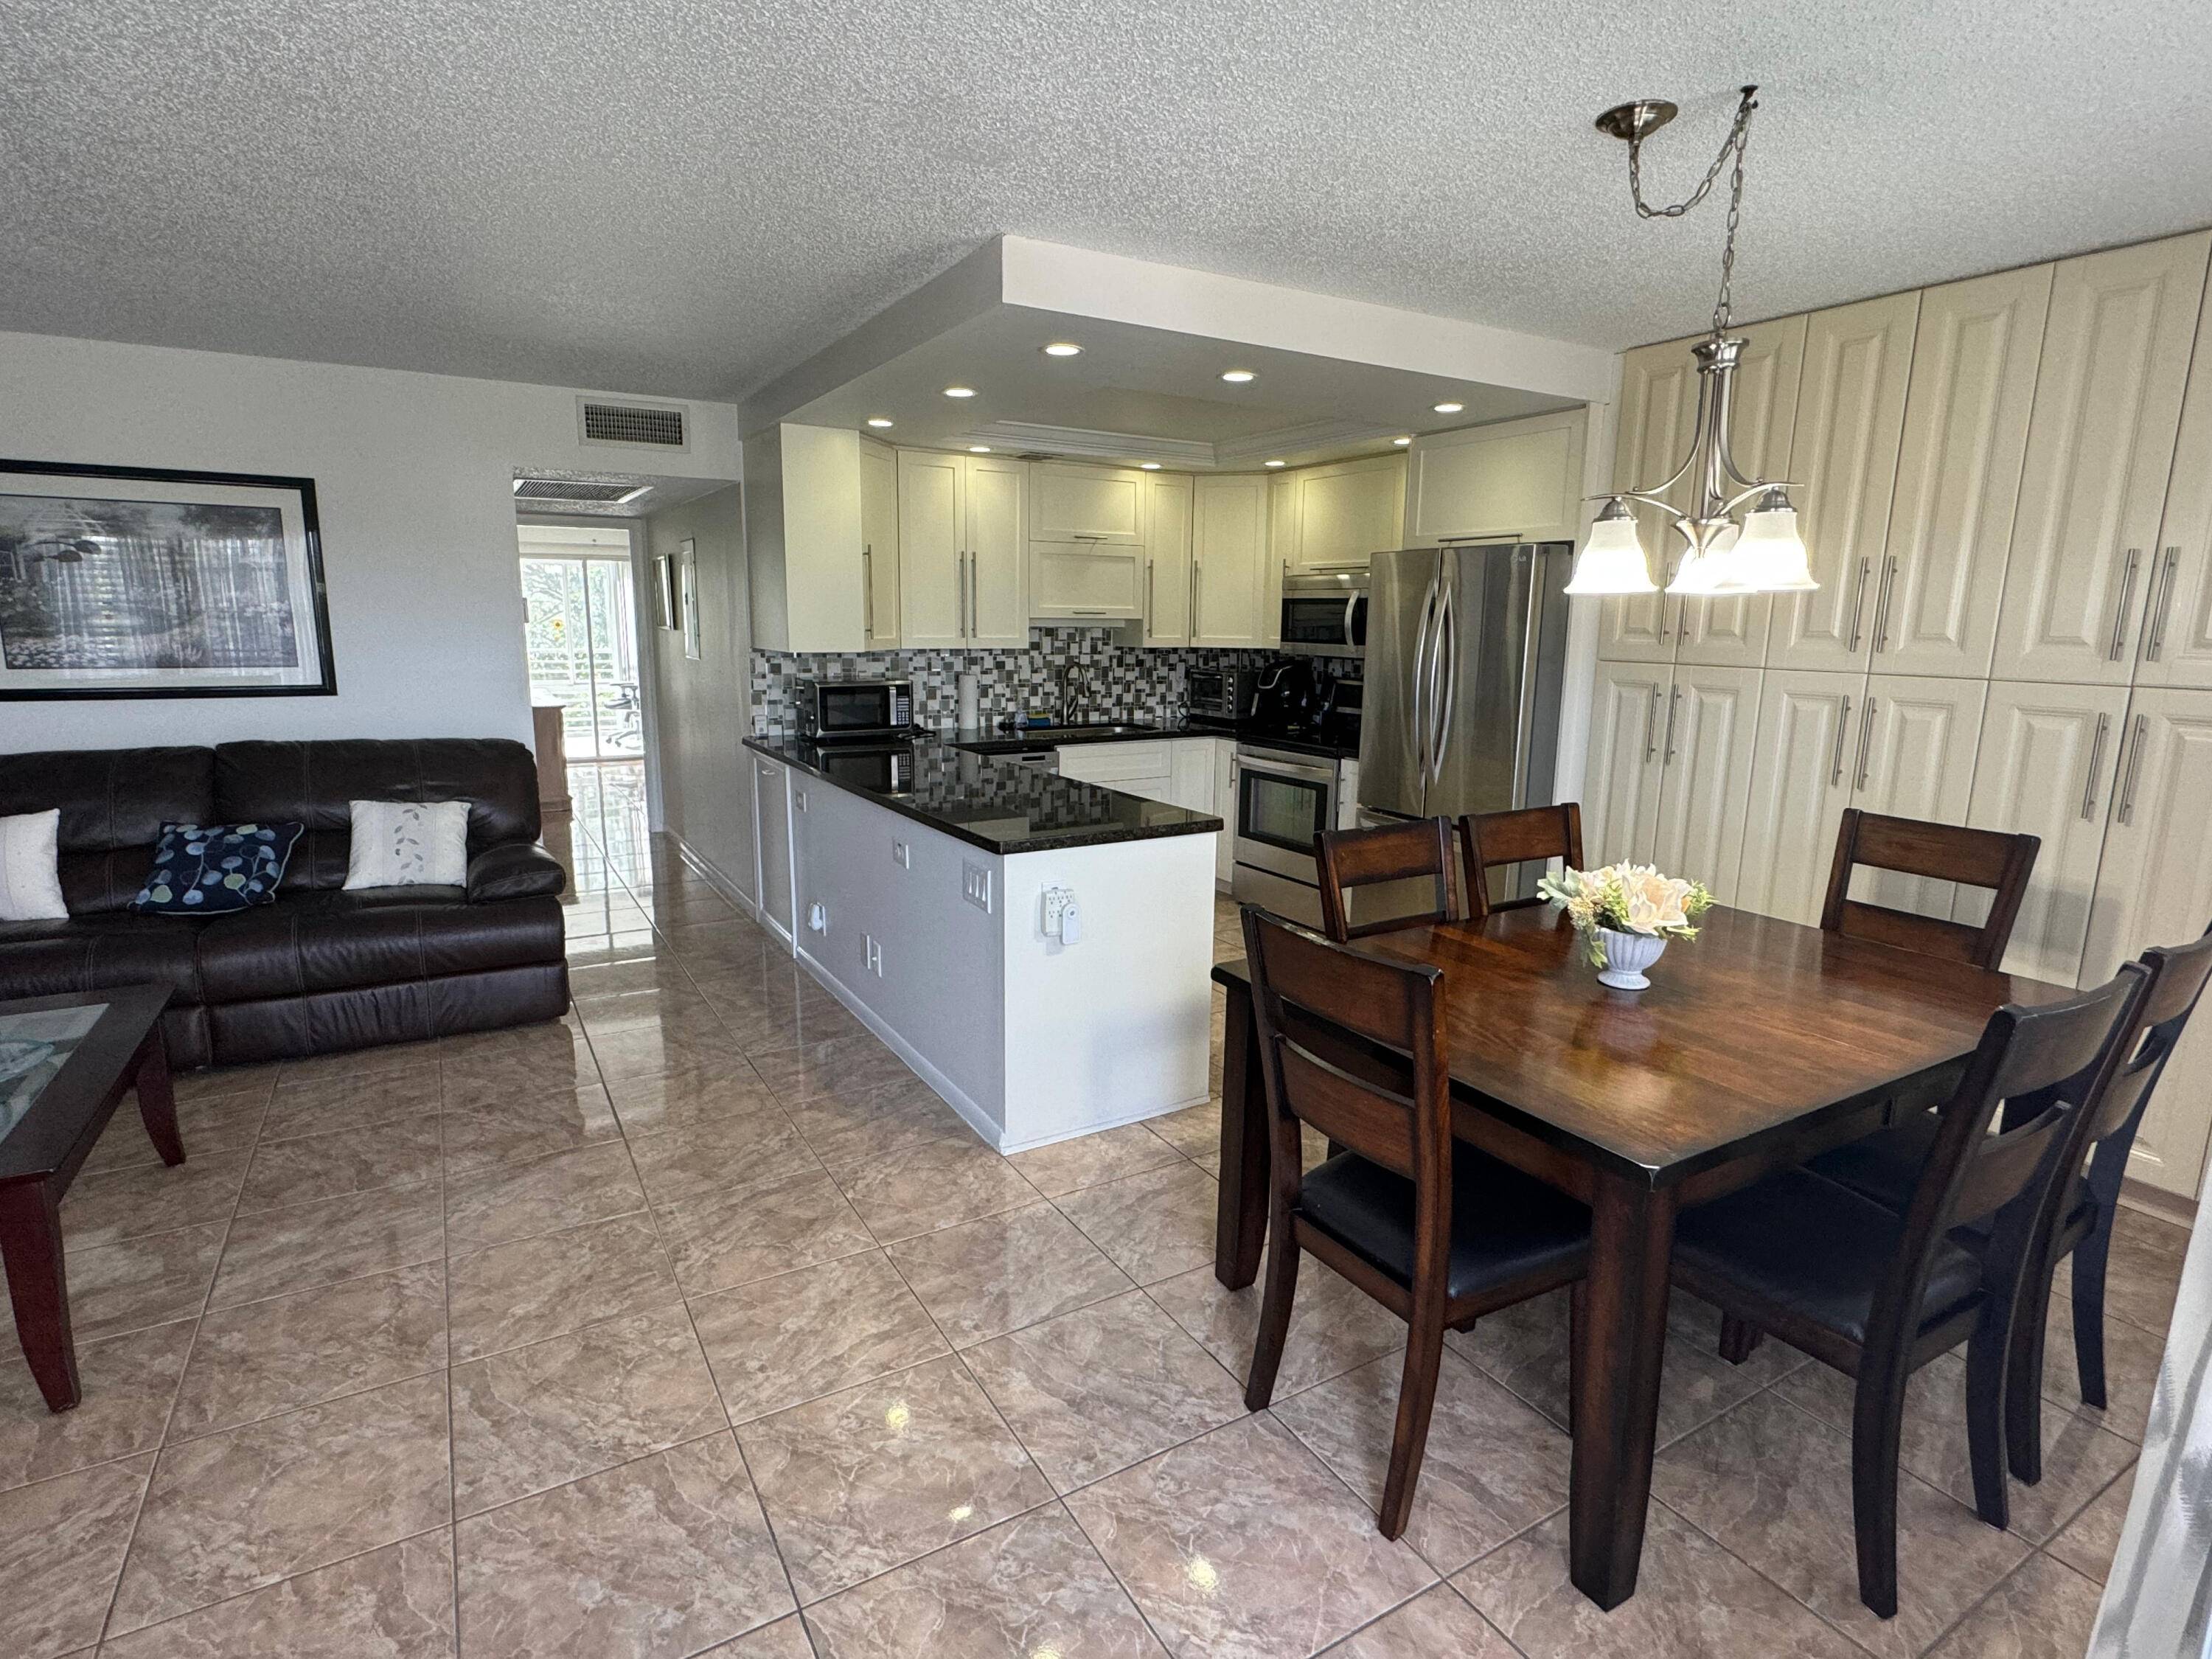 Near the clubhouse and amenities, this updated unit has eliminated the wall between kitchen and living room to create a spacious, open floorplan.